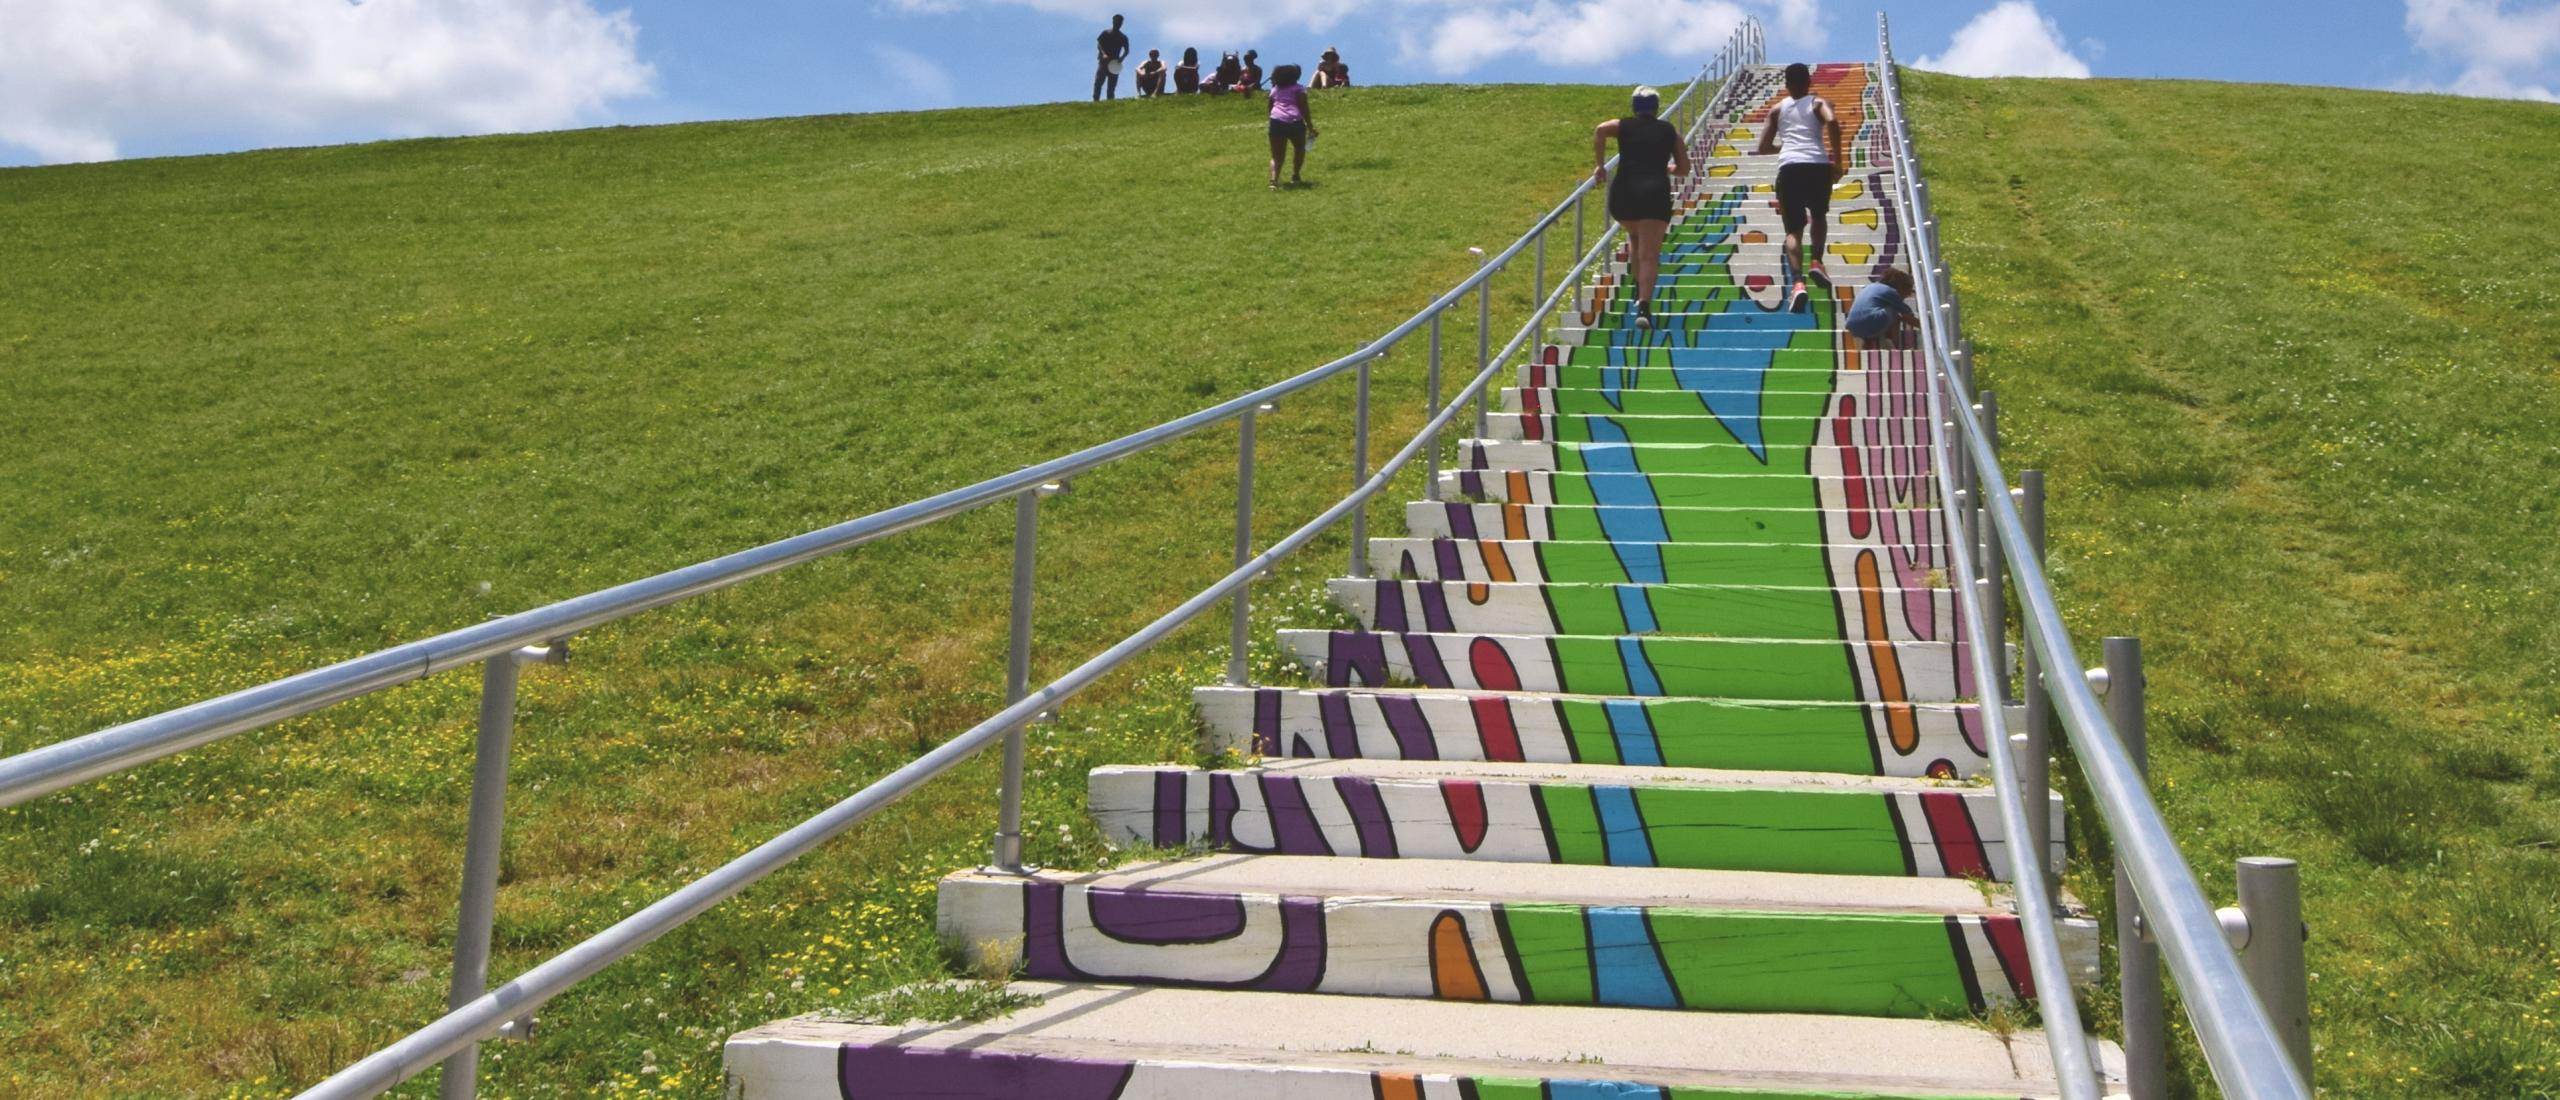 colorful stairs in a park